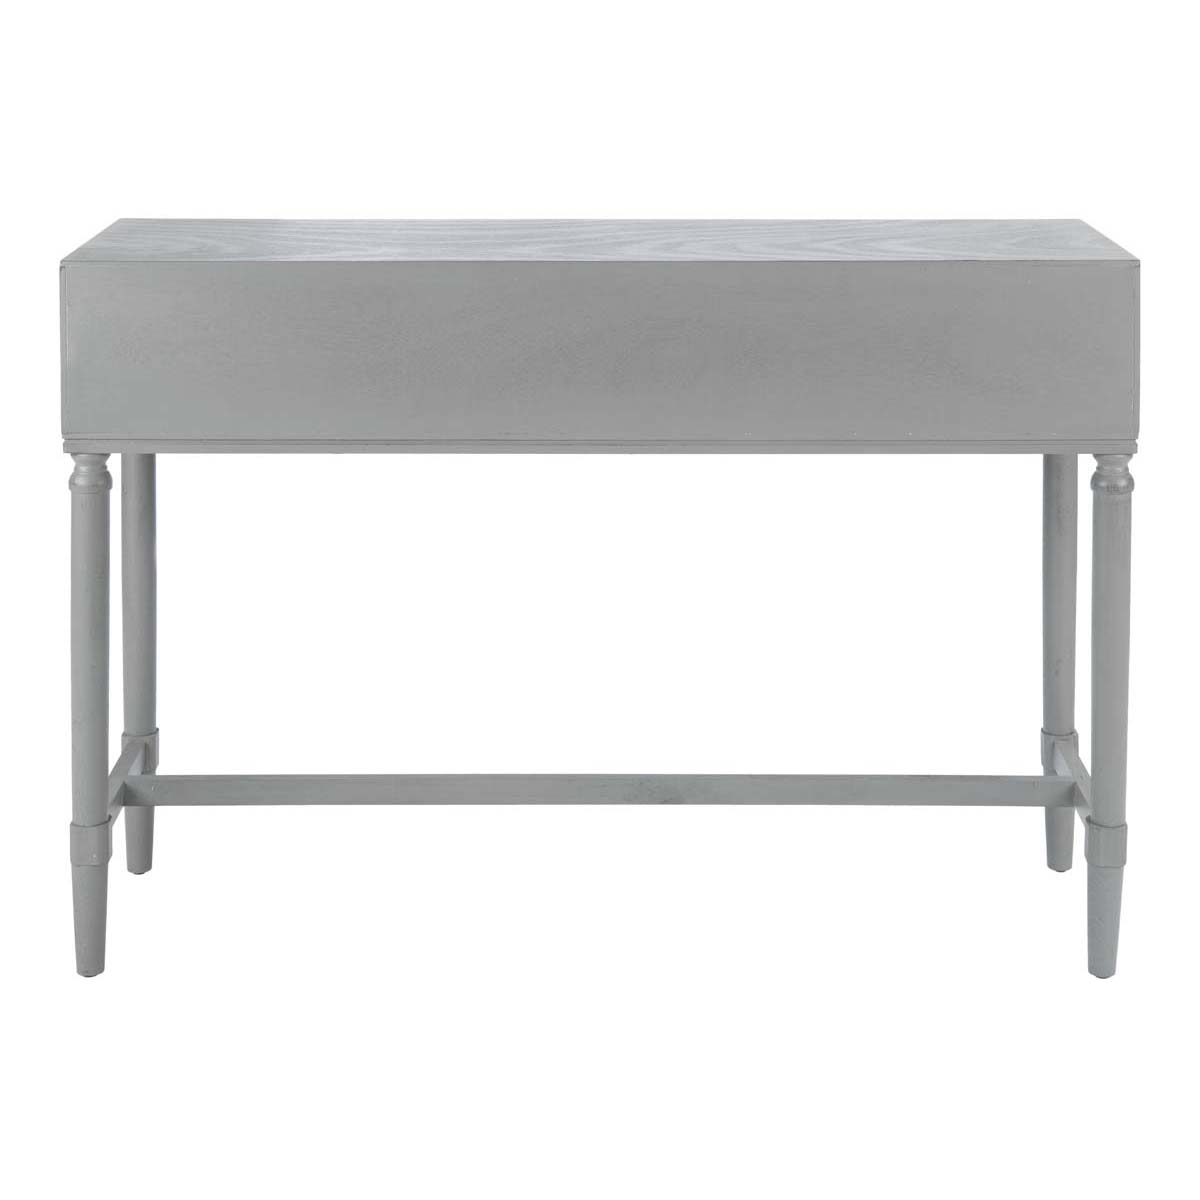 Safavieh Aliyah 4Drw Console Table, CNS5730 - Distressed Grey